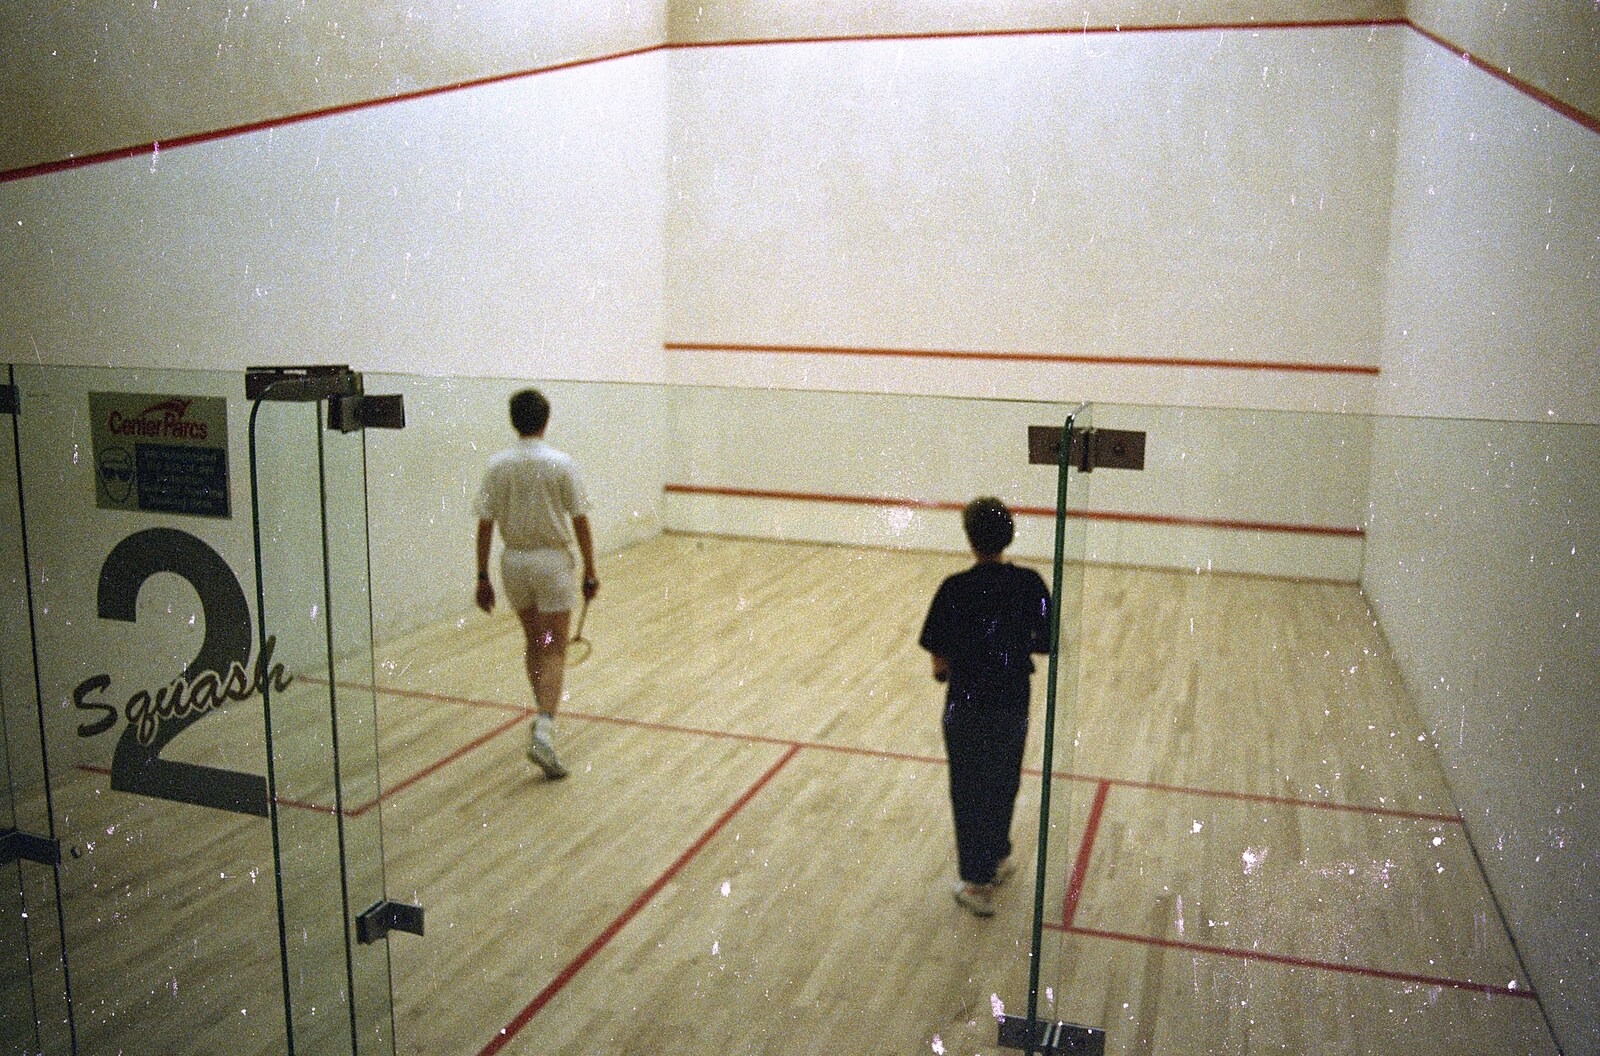 A rare photo of Nosher playing squash from A Night Out at Pedro's, and a Trip to Centre Parcs, Norwich and Elvedon - 5th October 1991